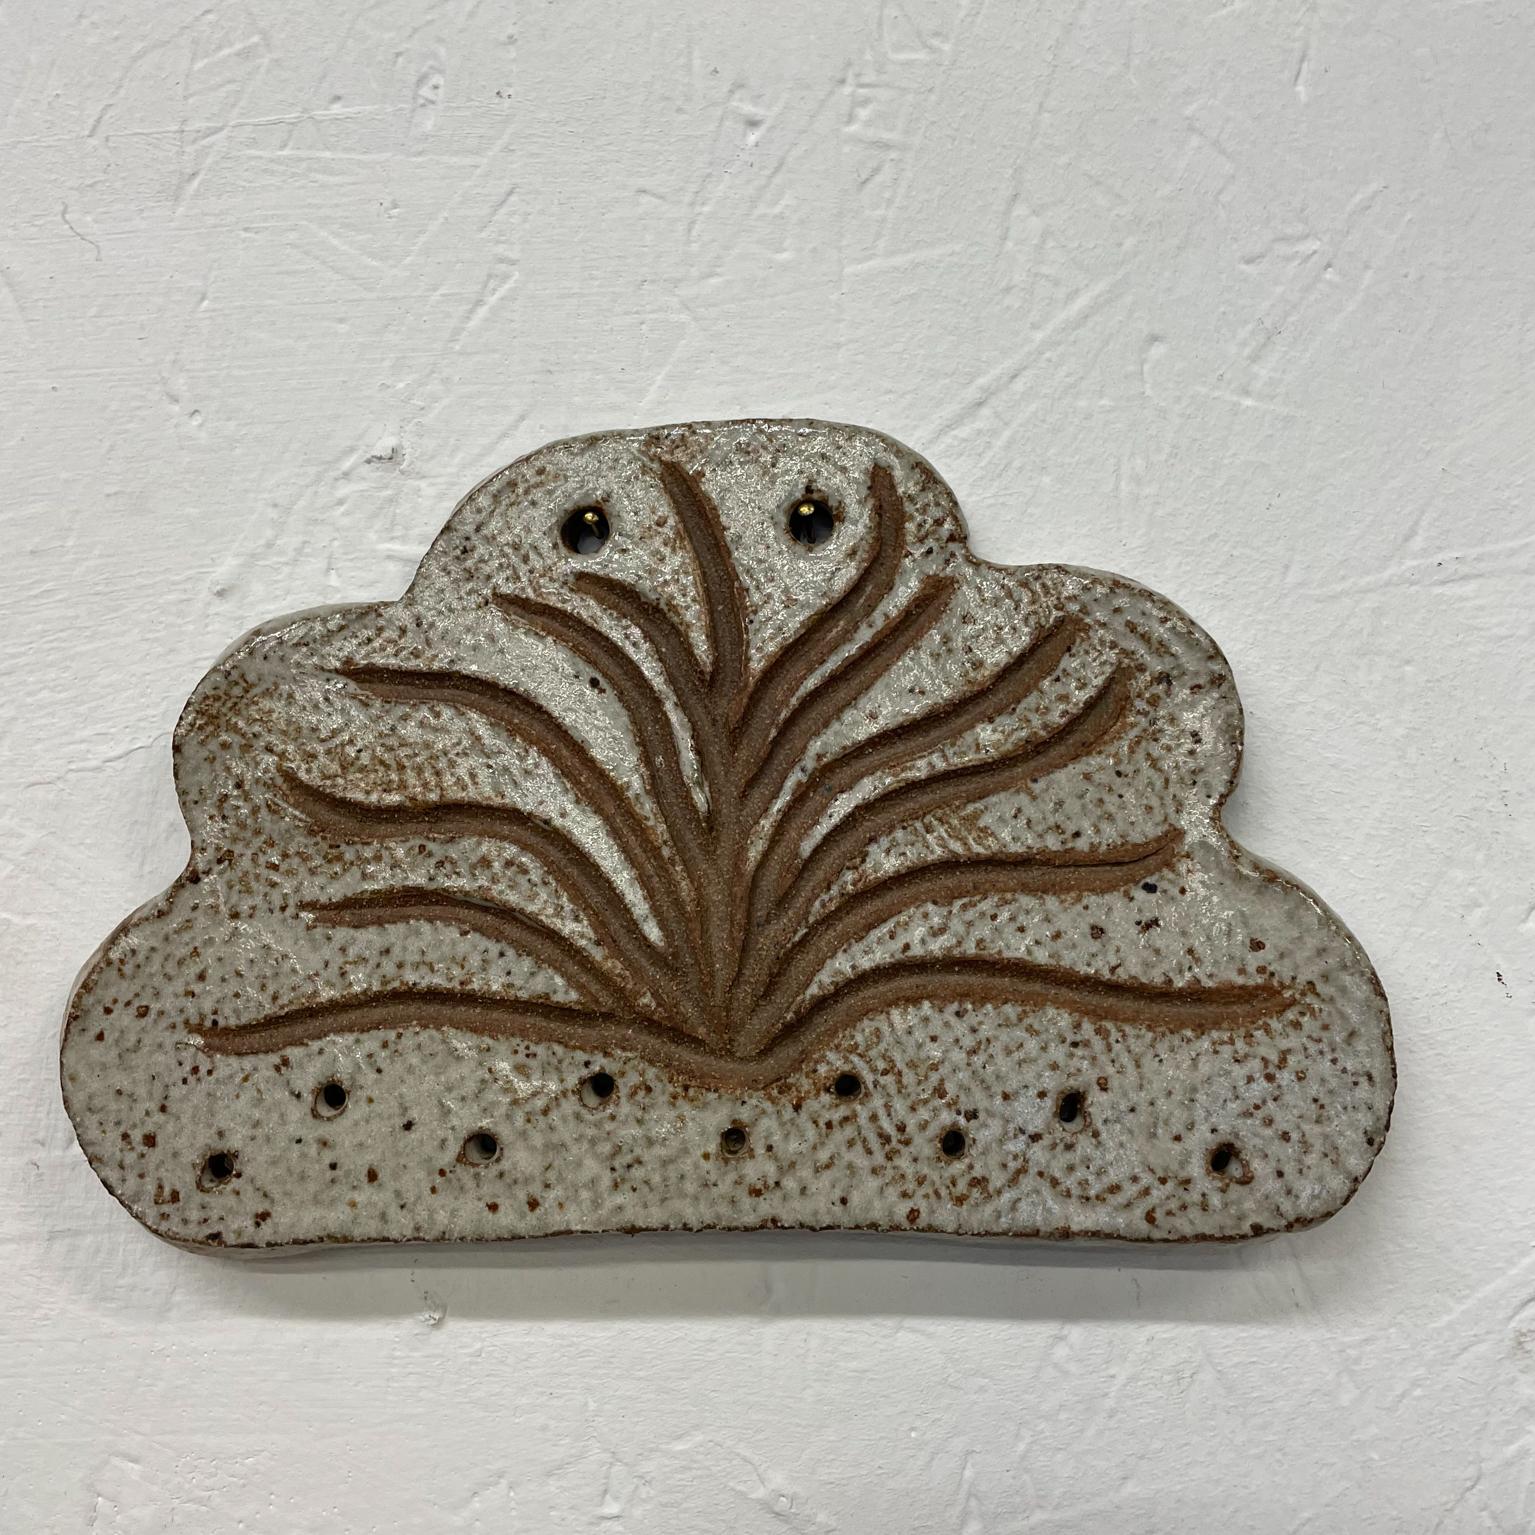 Pottery
Diane Baldwin hanging pottery wall plaque agave maguey cactus design
Signed art
Measures: 5.25 H x 8.88 W x .38 thick inches
Unrestored original vintage condition.
See images provided.

